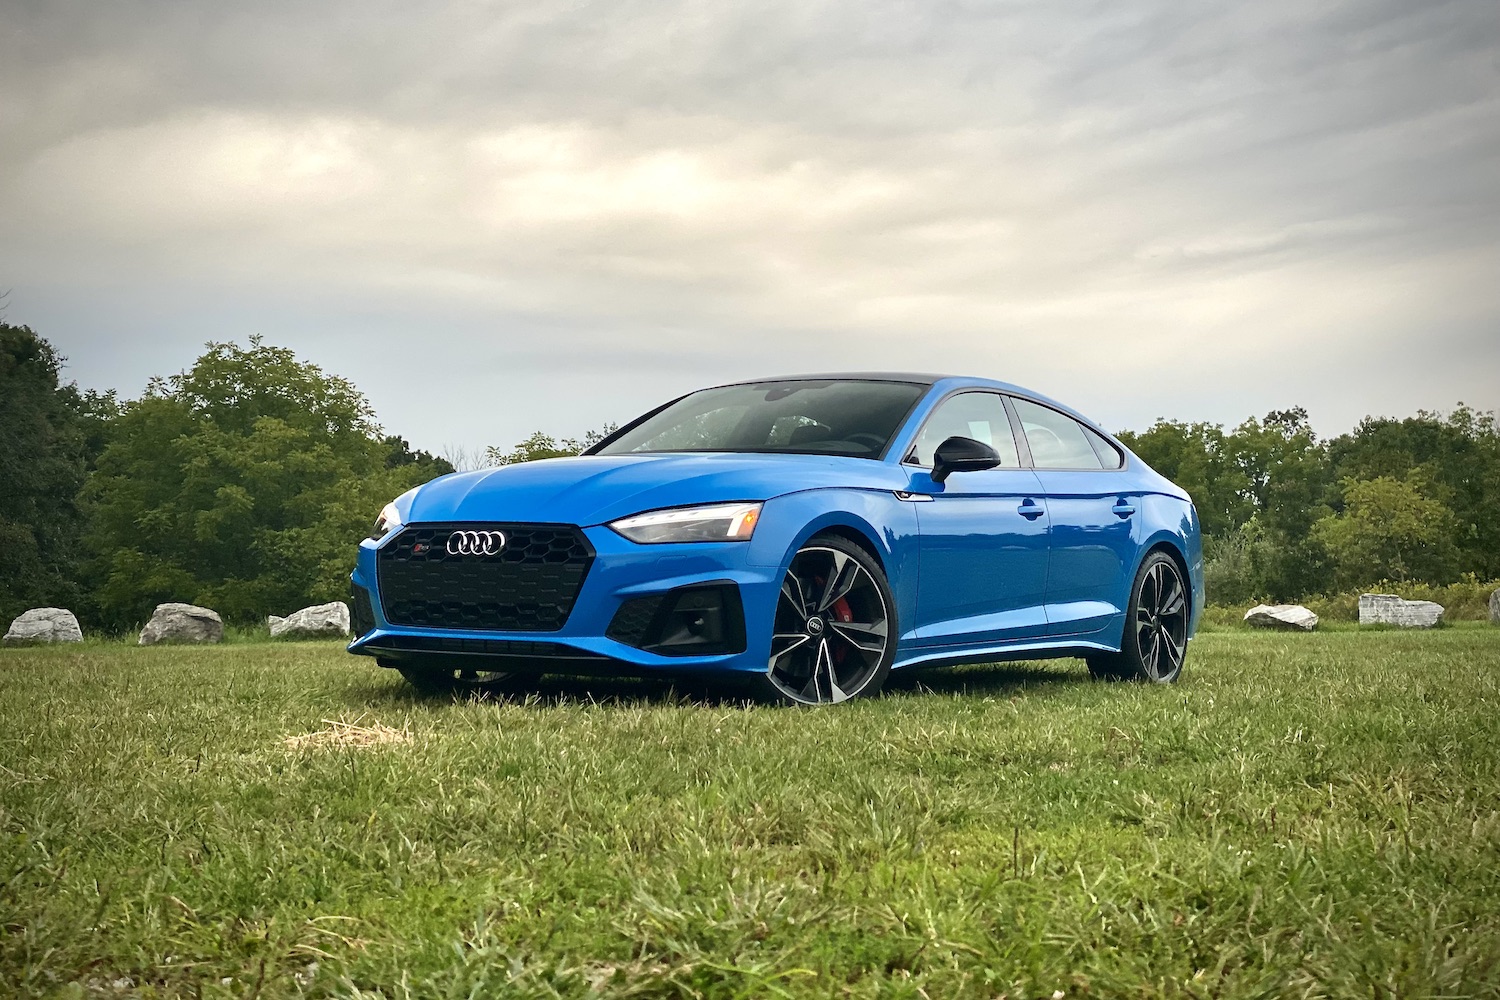 2023 Audi S5 Sportback: The perfect daily driver for people who